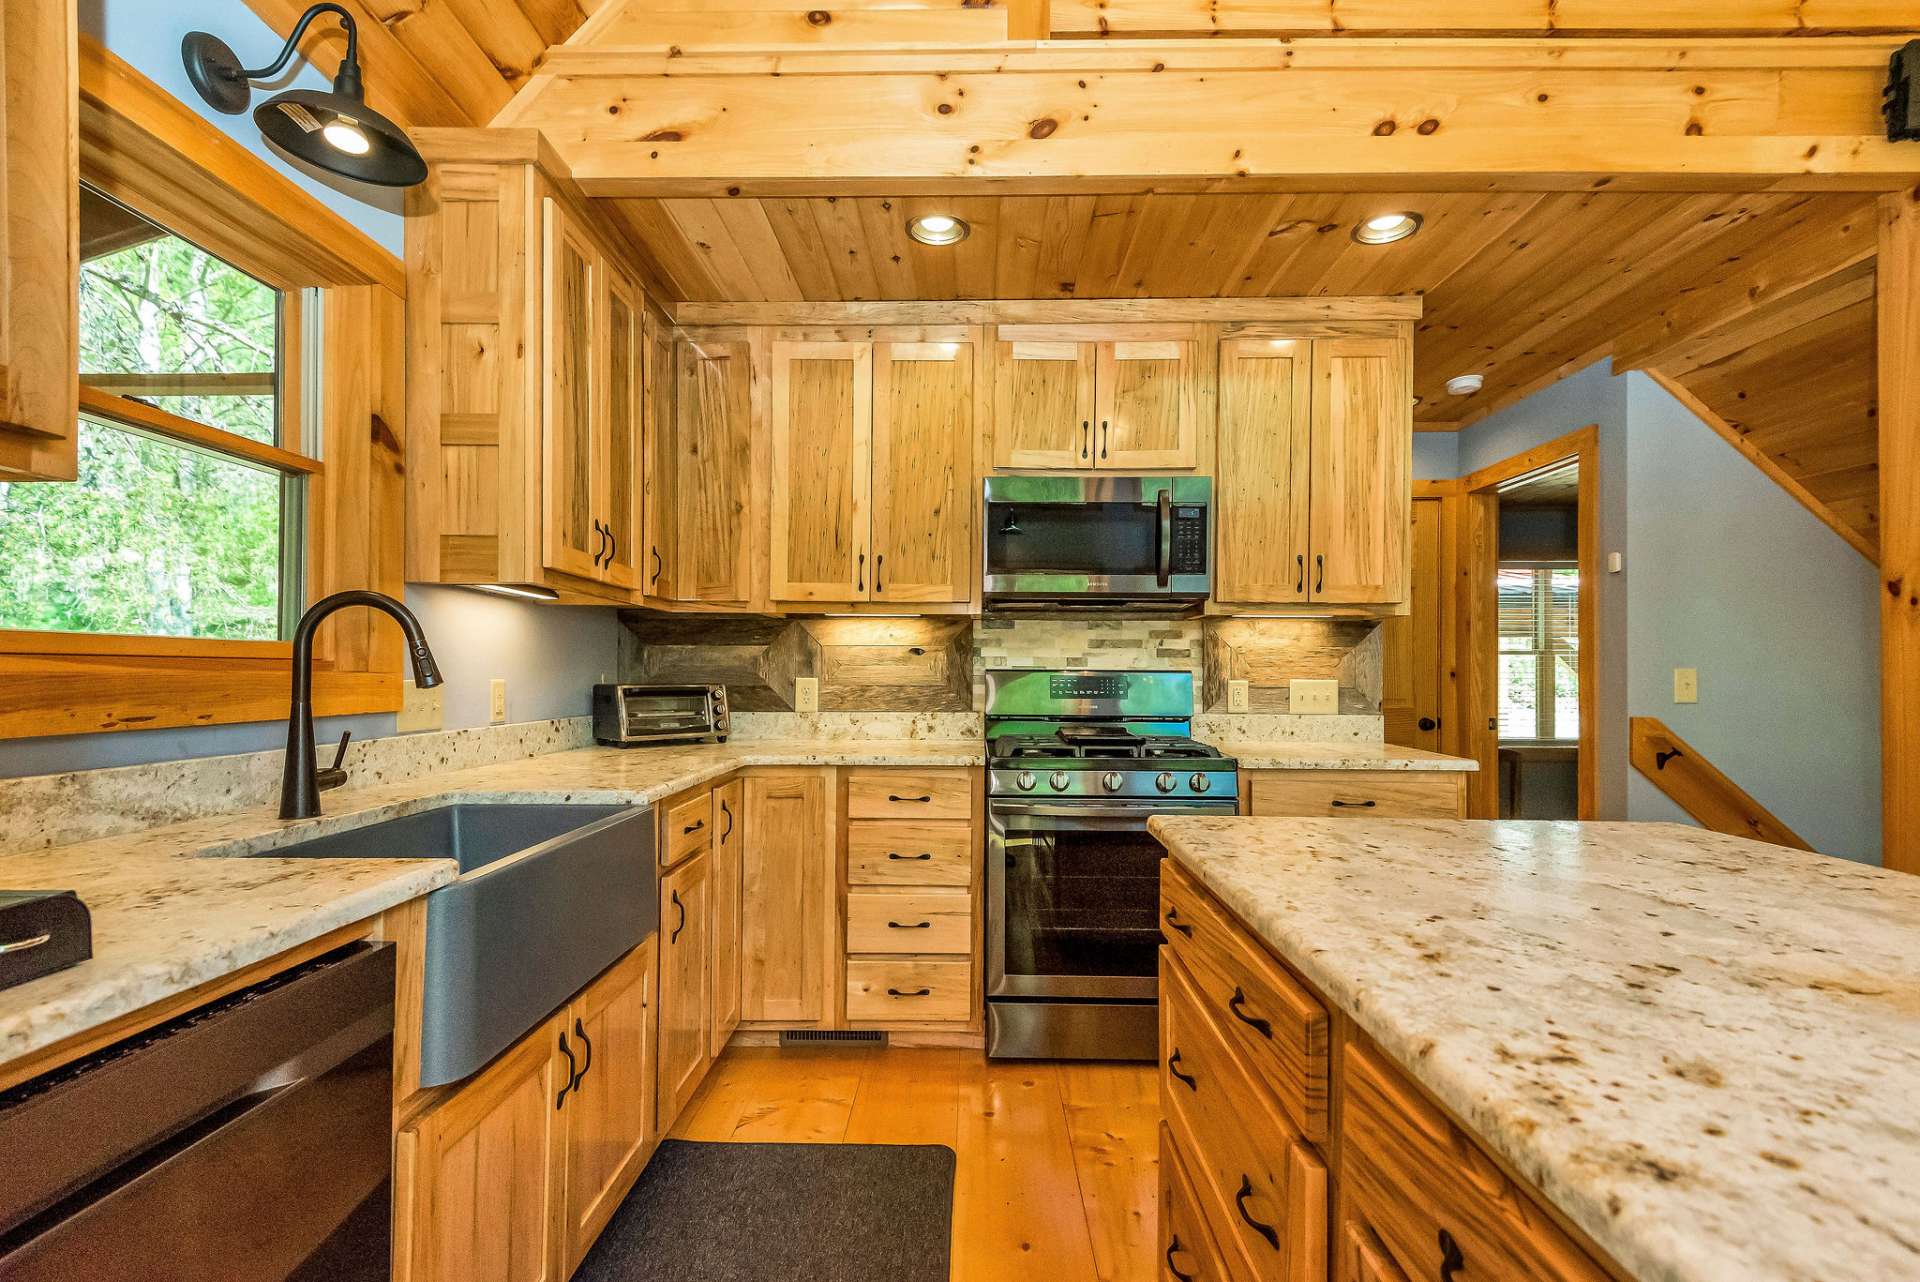 Additional barn wood accents in the kitchen further enhance the rustic charm of the design, adding a unique twist to the overall aesthetic.